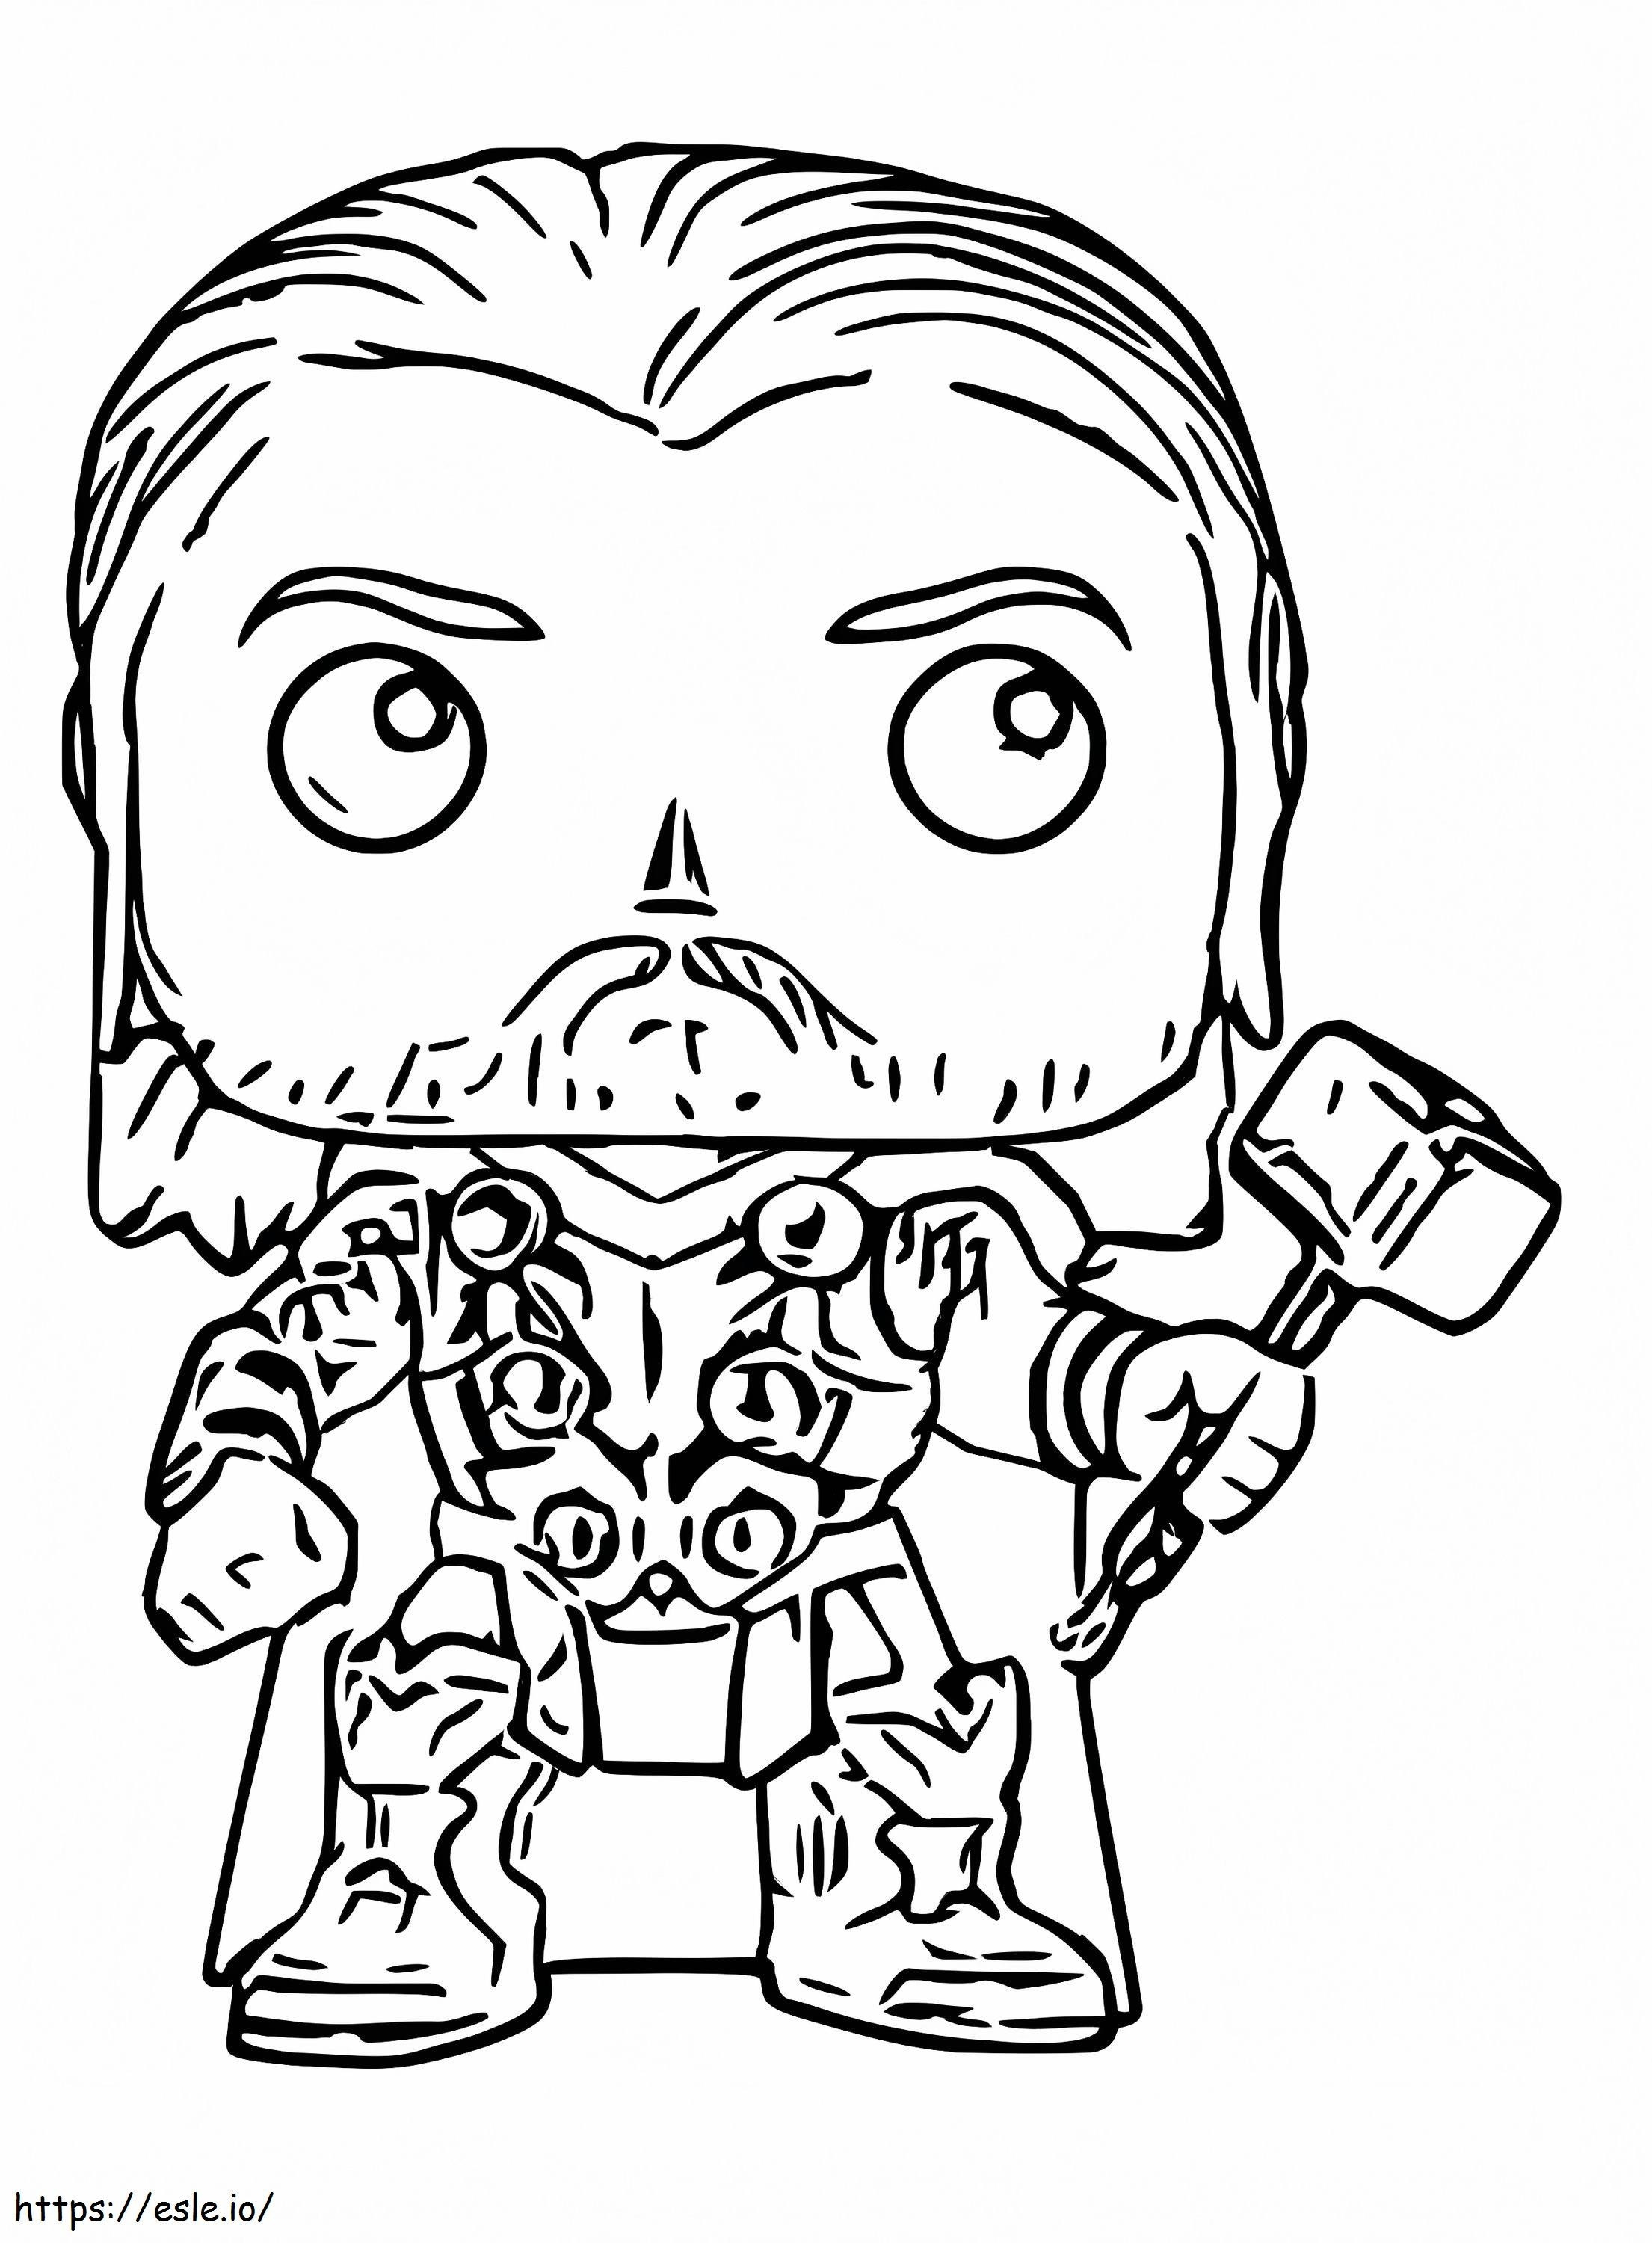 Thor Funko coloring page